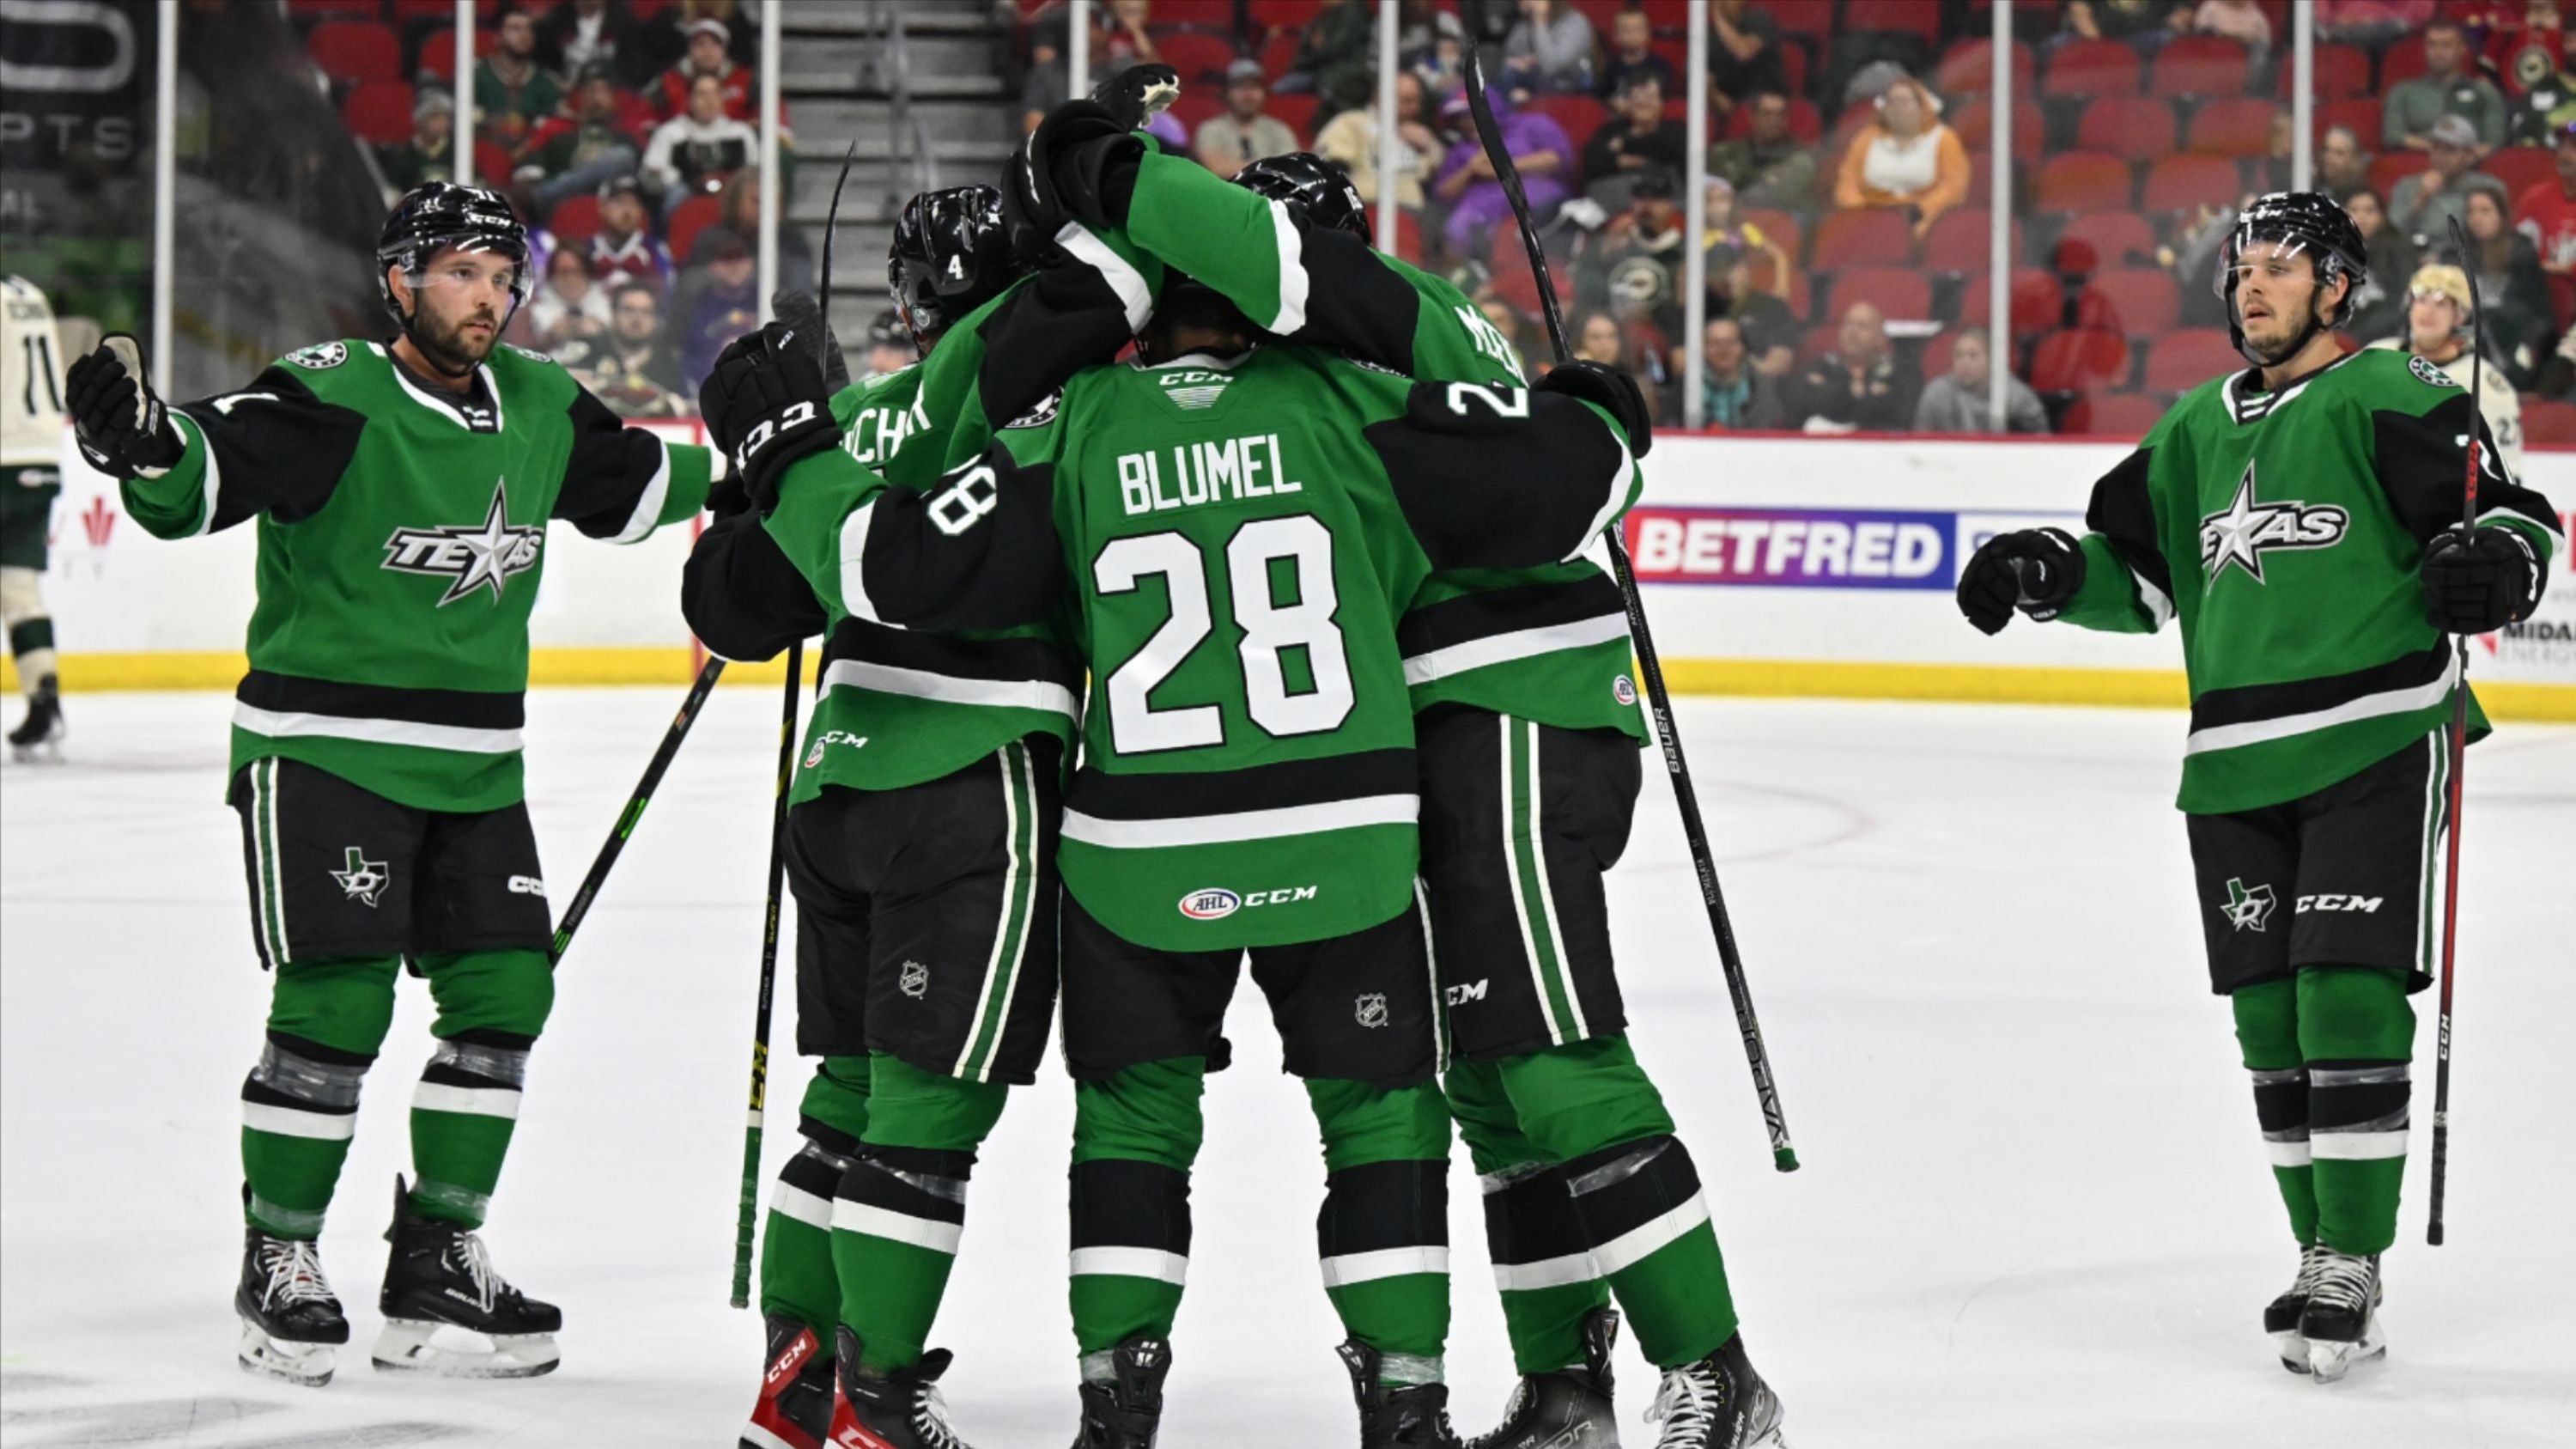 Stars Prevail in Shootout to Complete Sweep in Iowa